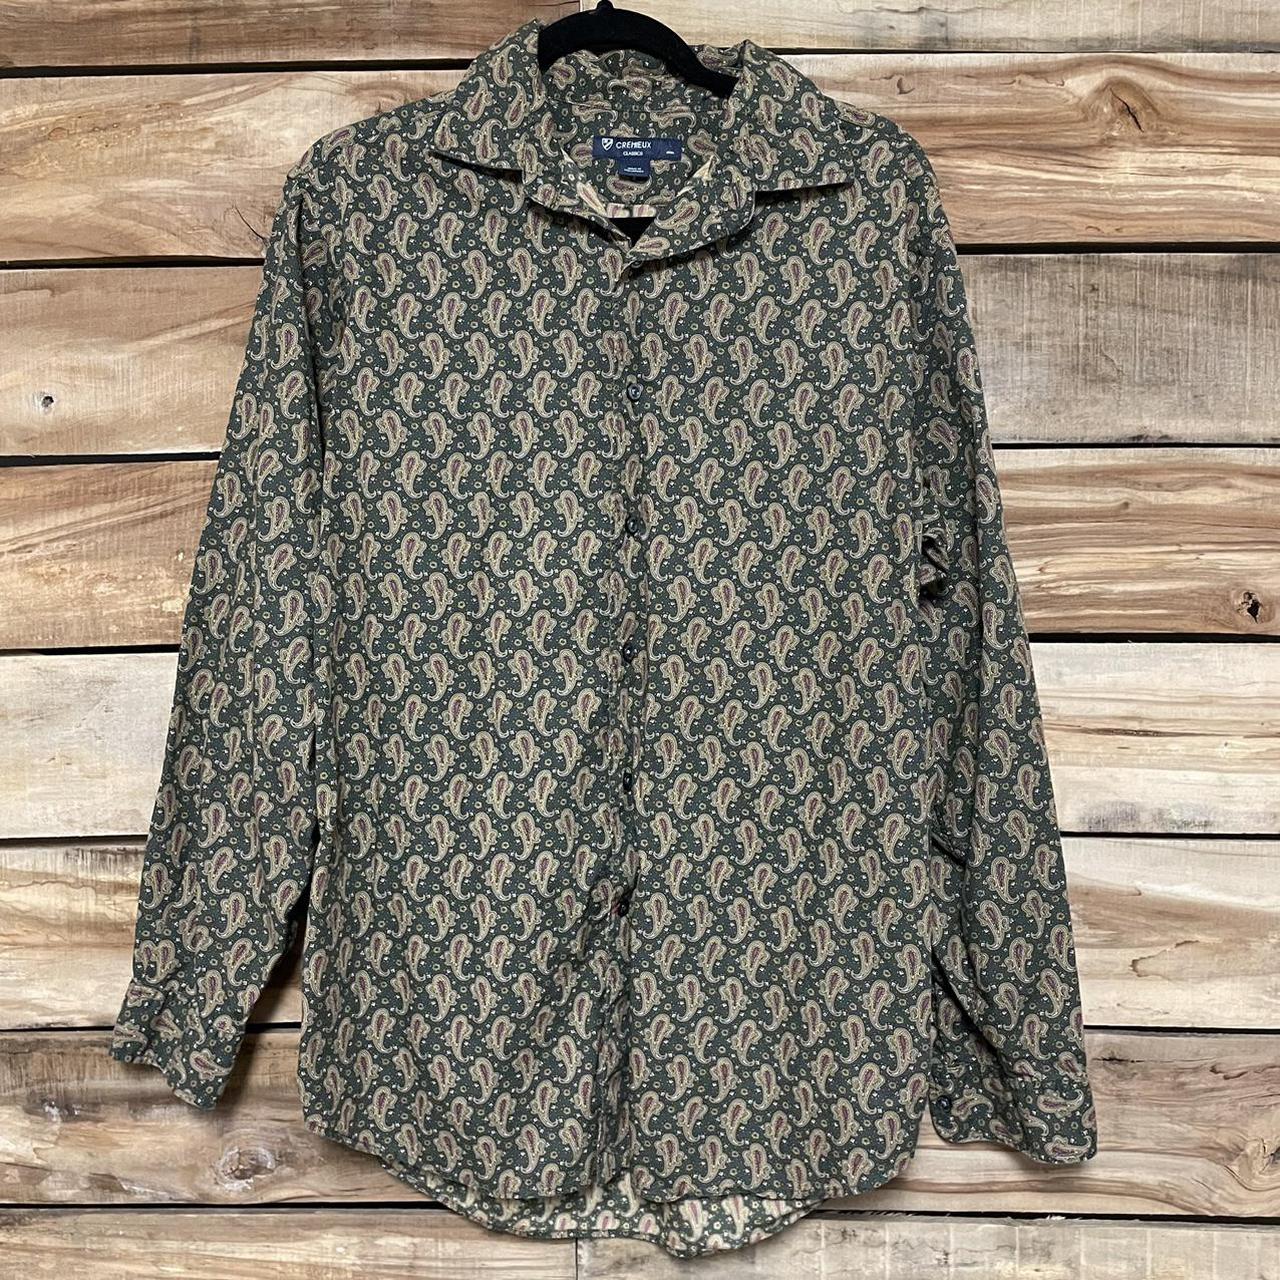 Product Image 1 - Cremieux
Green
Good condition
Size large
All-over print shirt,